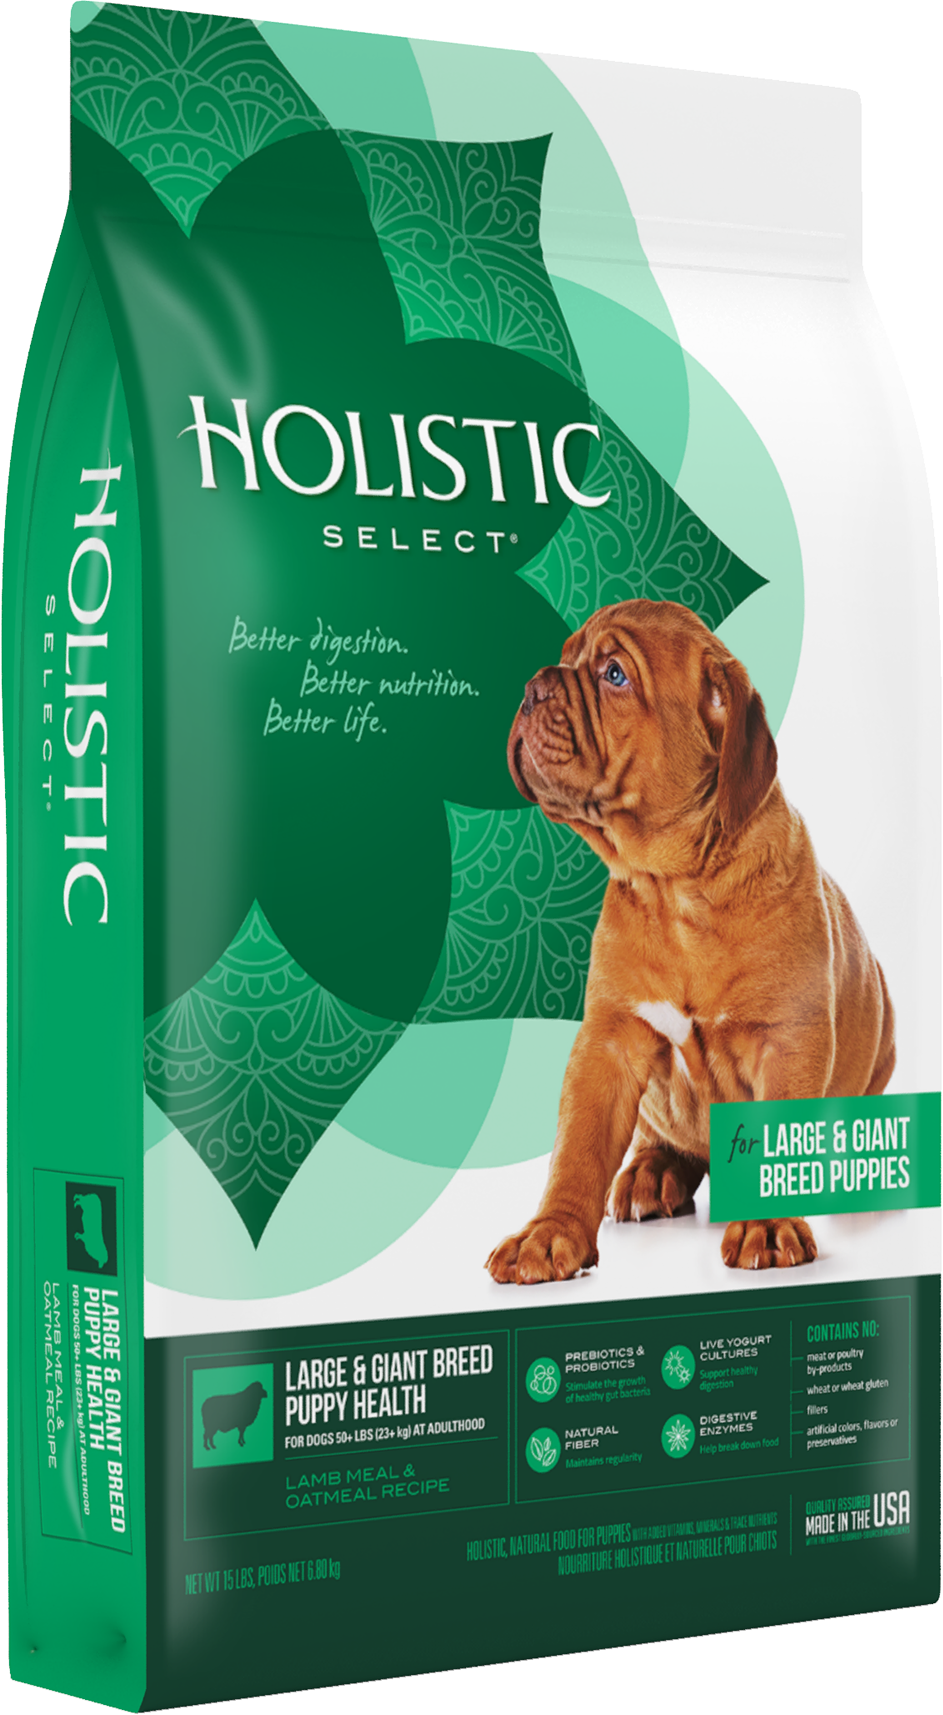 Large & Giant Breed Puppy Health product packaging image 1